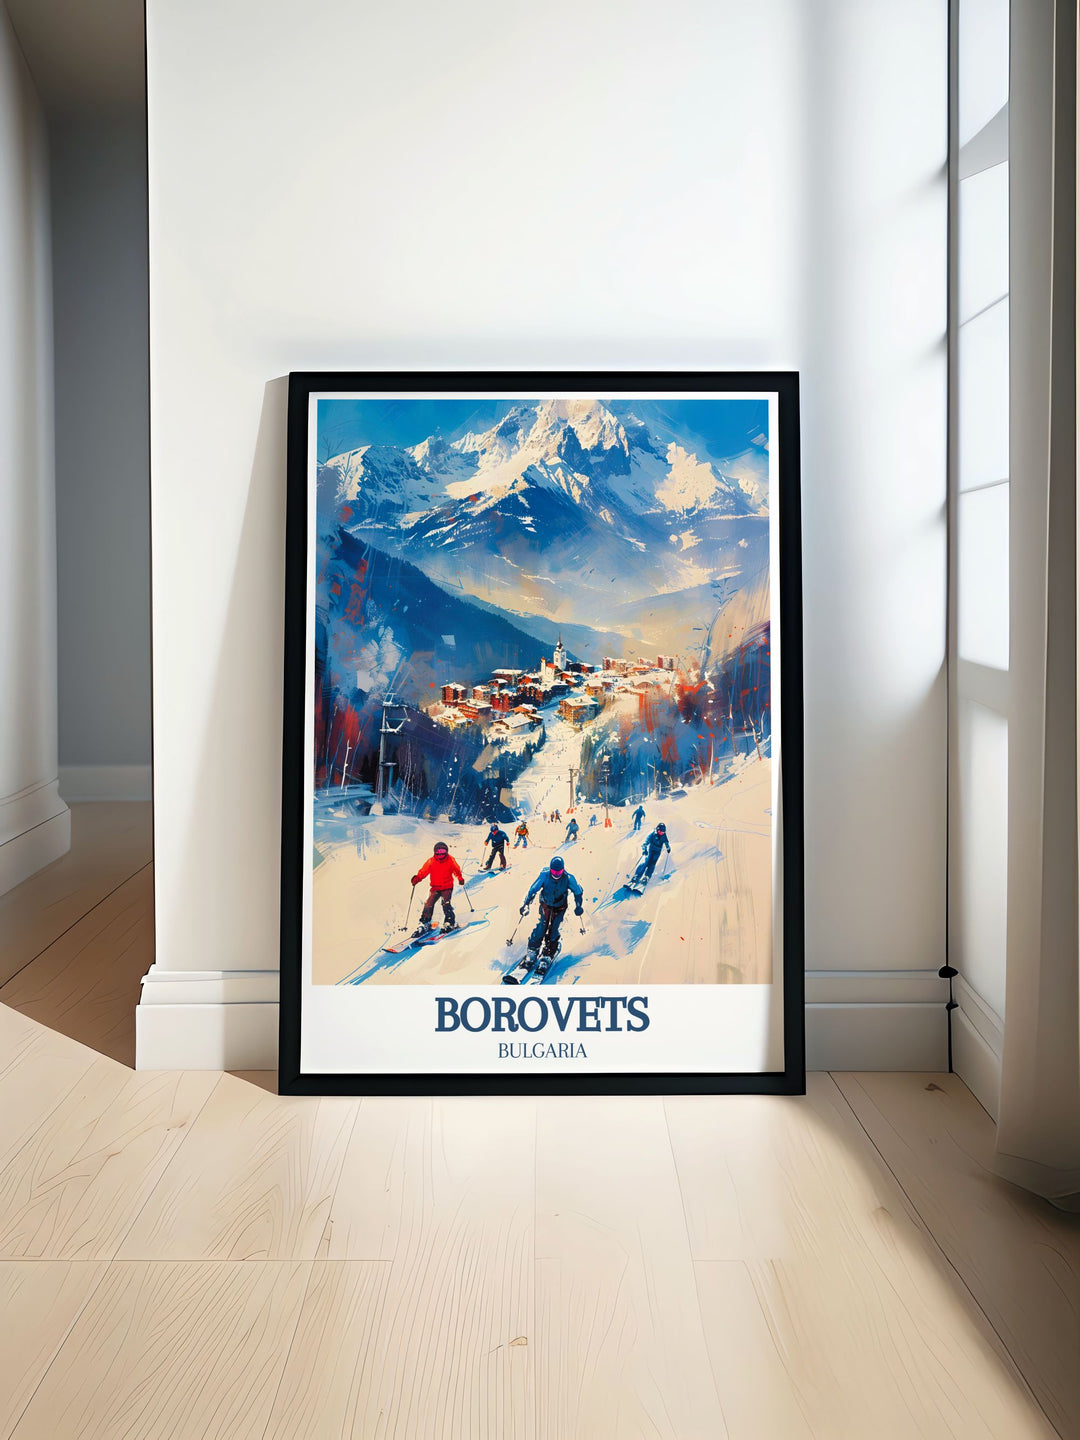 Unique artwork of Borovets featuring its lively resort area and the serene landscapes of Musala Peak, perfect for personalized gifts or home decor. This print captures the essence of Bulgarias alpine charm.